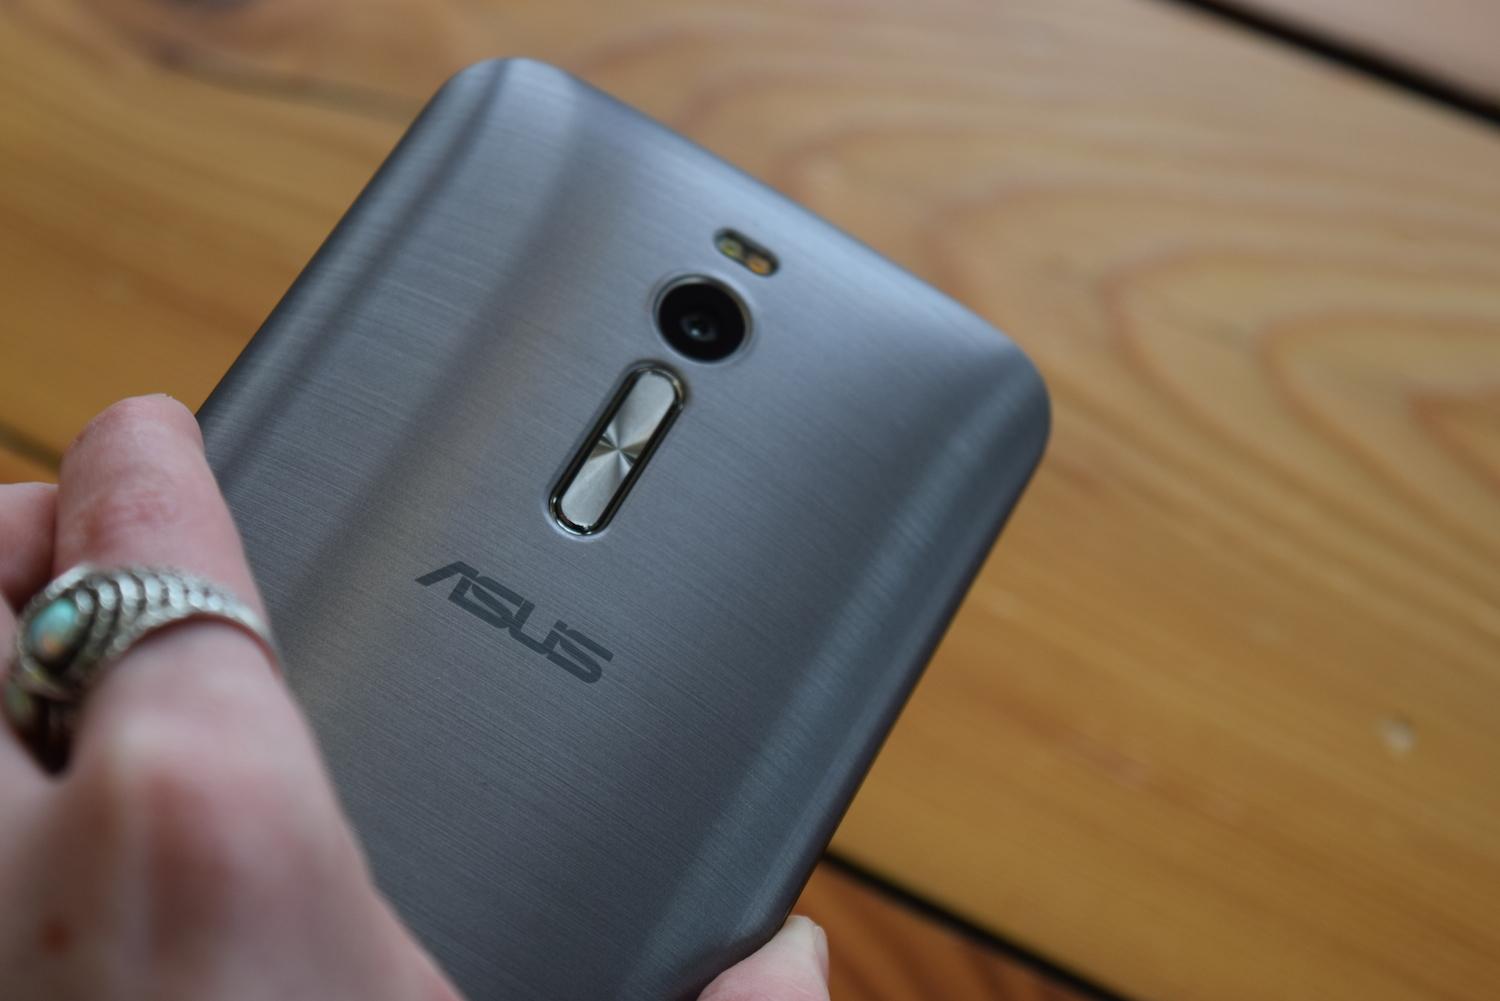 asus zenfone 2 packs a lot of power into an attractive phone